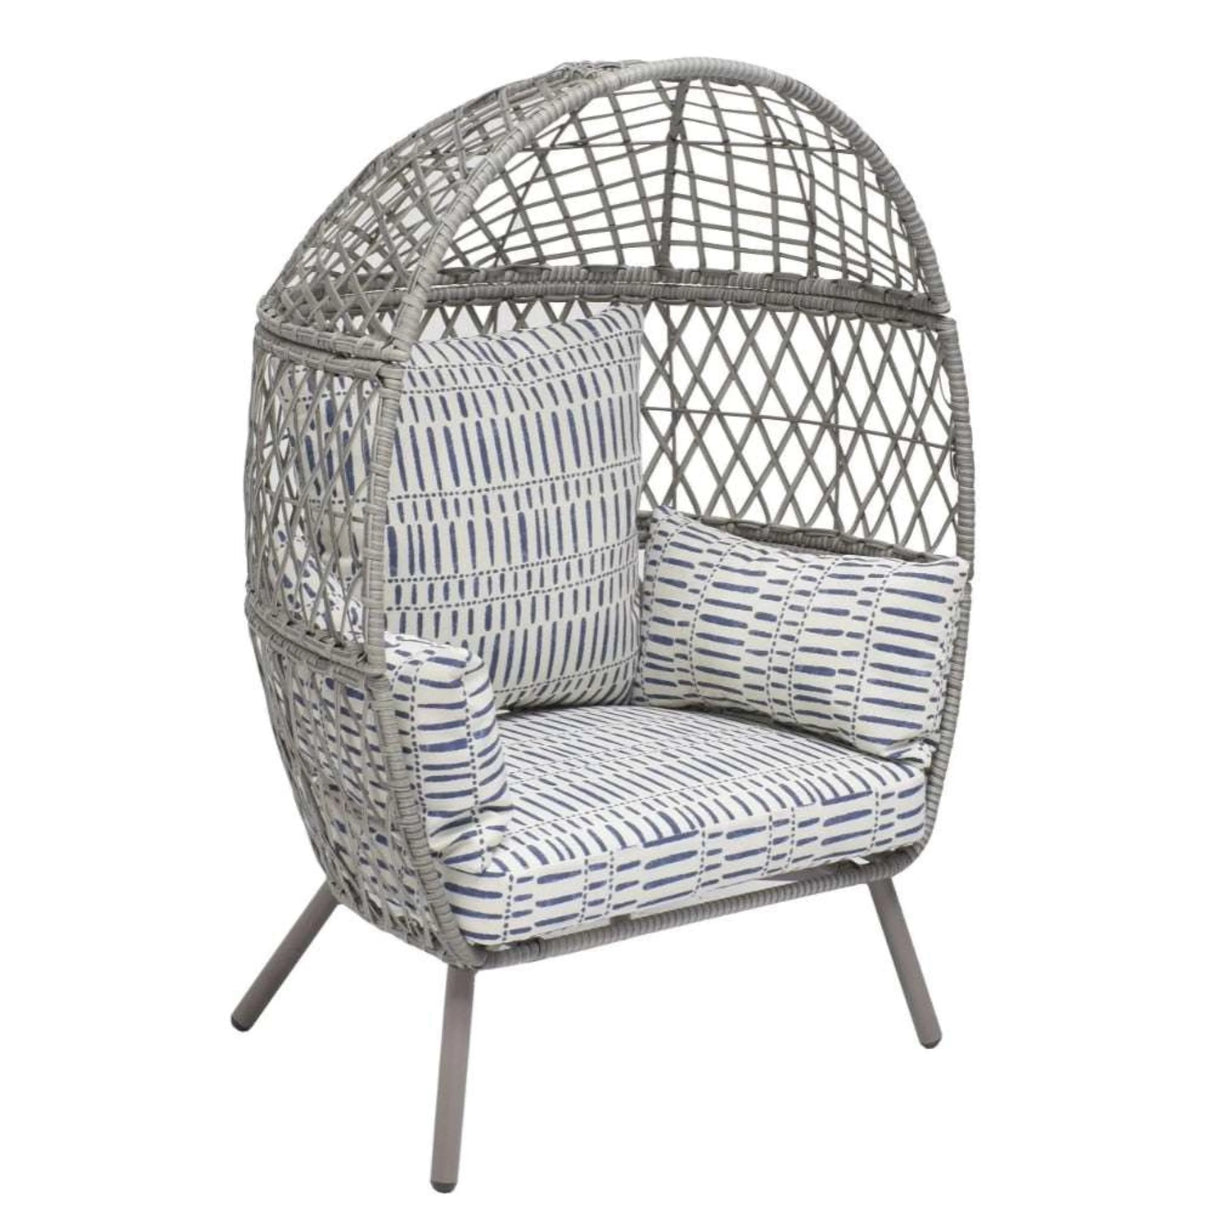 The Ultimate Outdoor Wicker Egg Chair